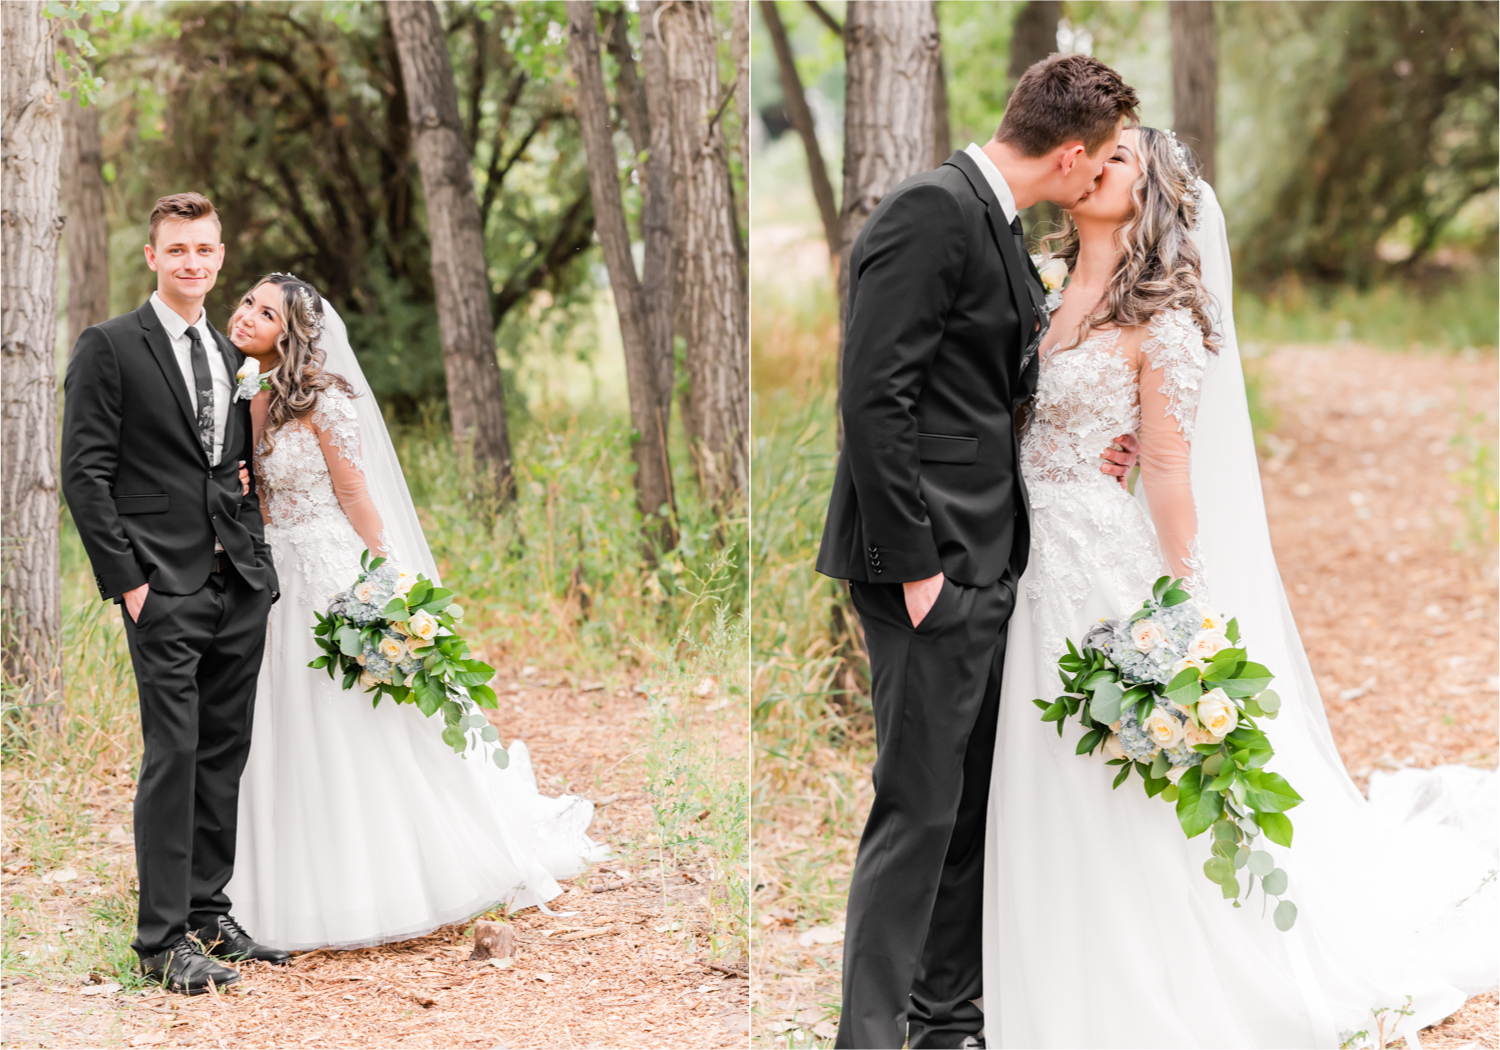 Romantic and Rustic Wedding at The Mill in Windsor | Britni Girard Photography | Colorado based wedding photography and videography team | Bride and Groom Portraits